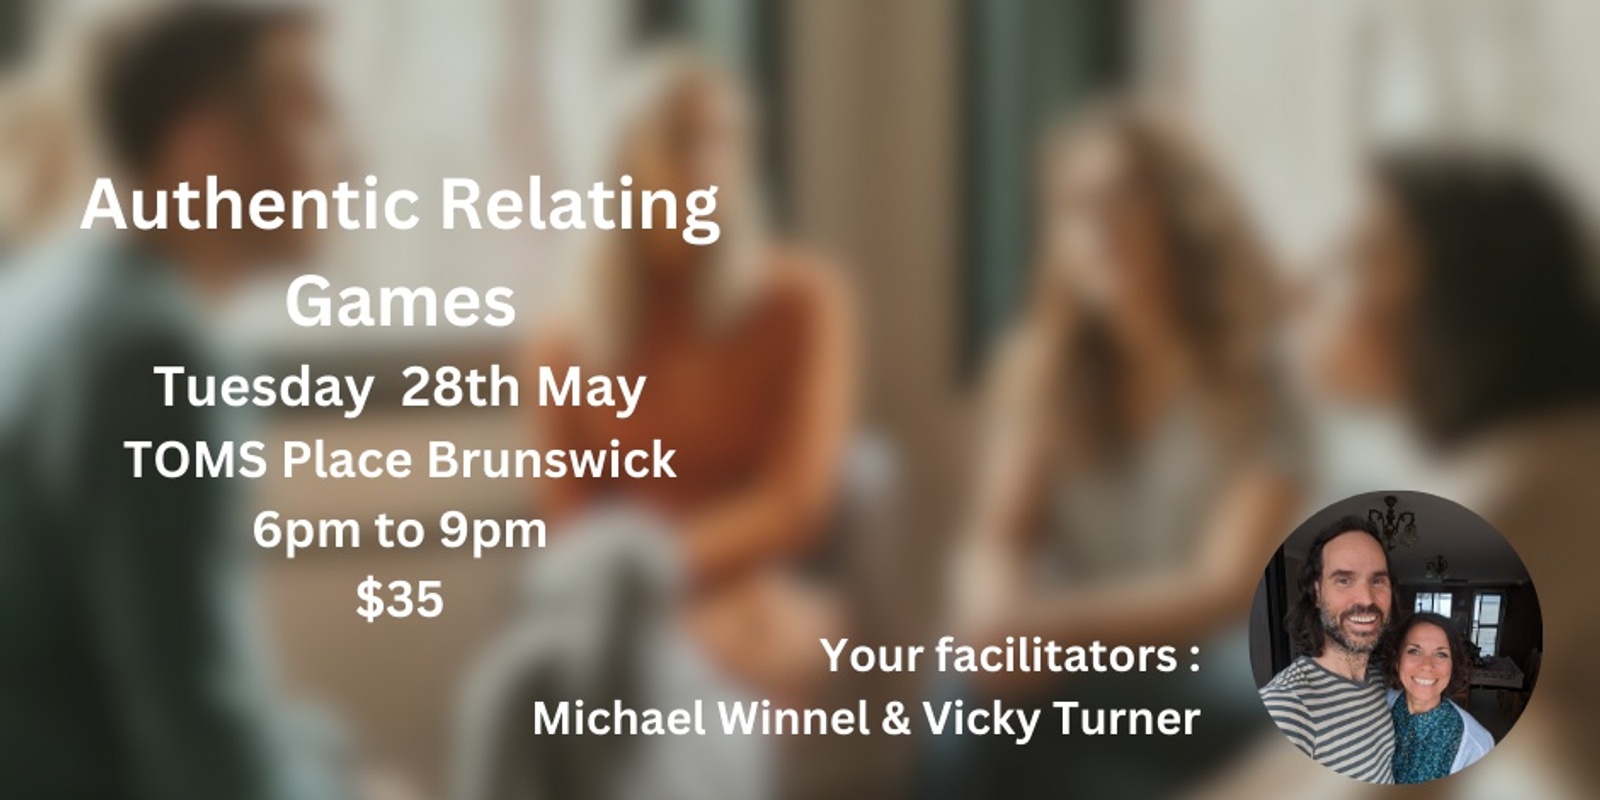 Banner image for Authentic Relating Games with Michael Winnel & Vicky Turner in Brunswick, Melbourne  - Tuesday 28th May 6pm to 9pm